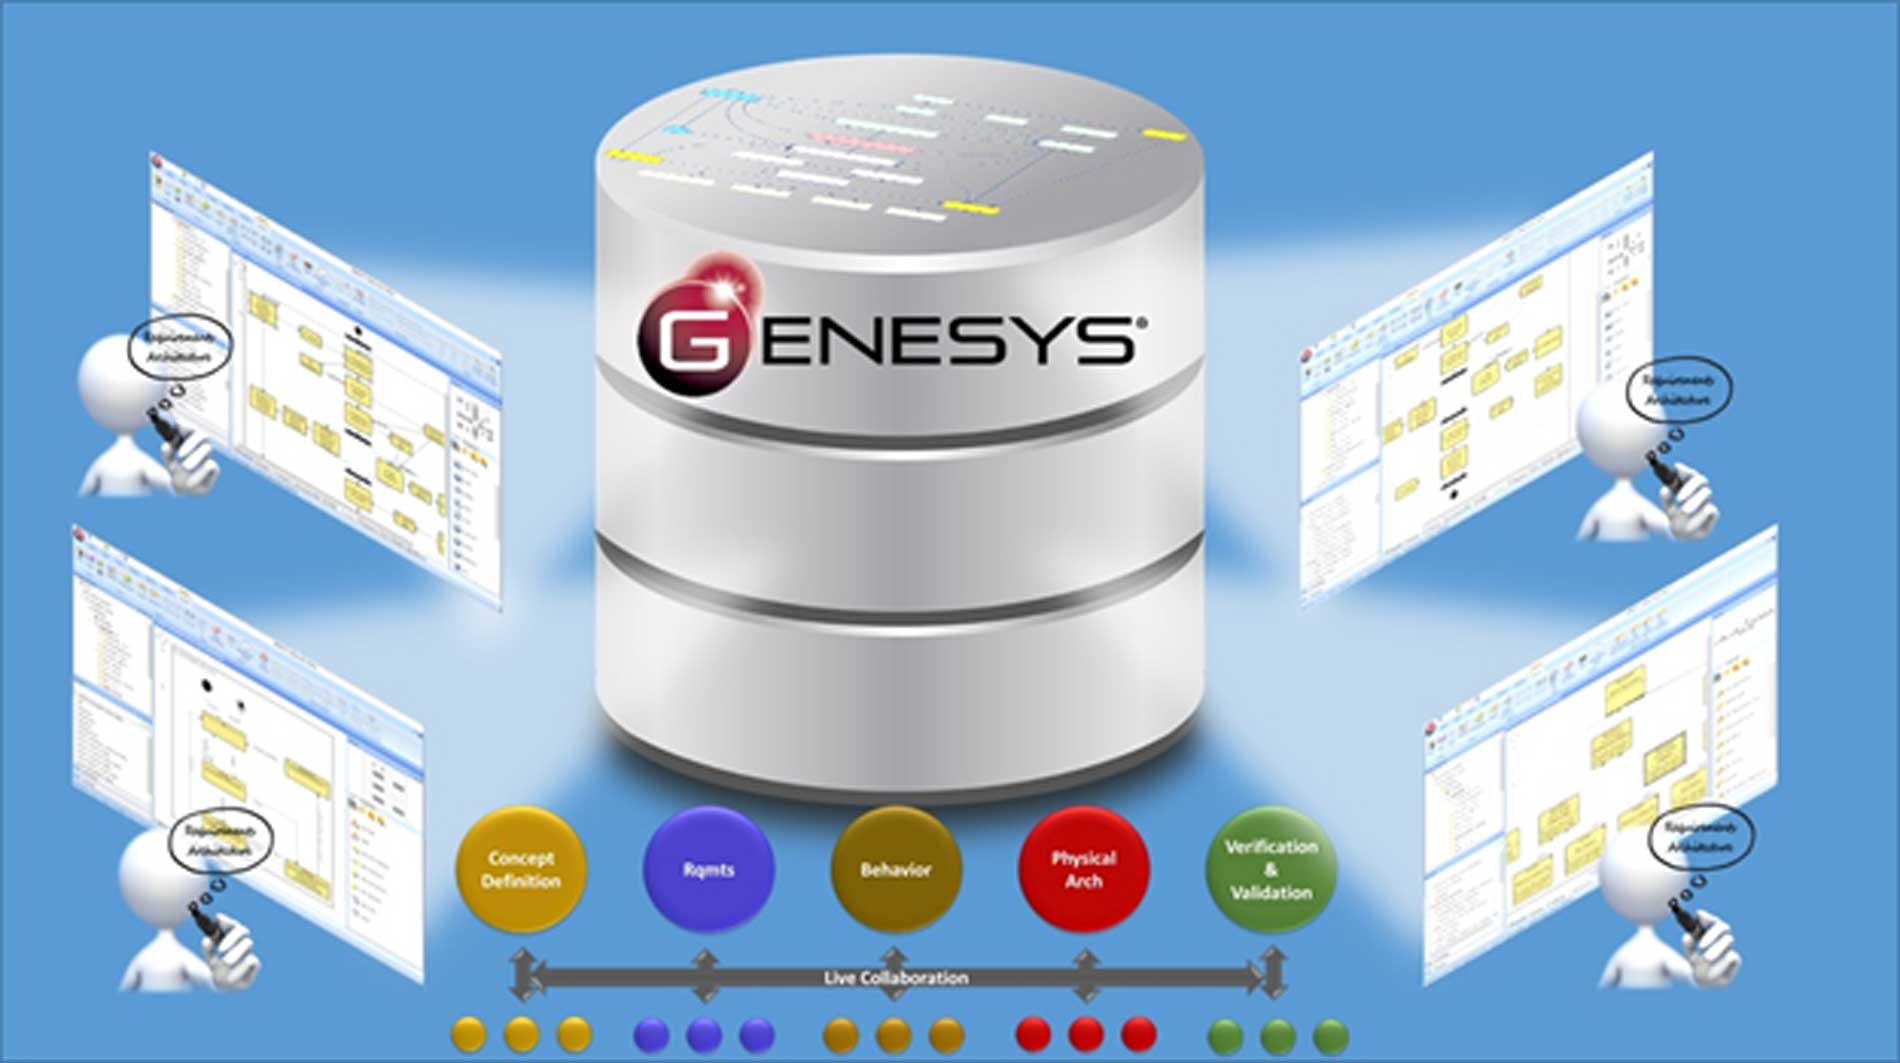 Conceptual illustration showing the interaction of various GENESYS software elements.